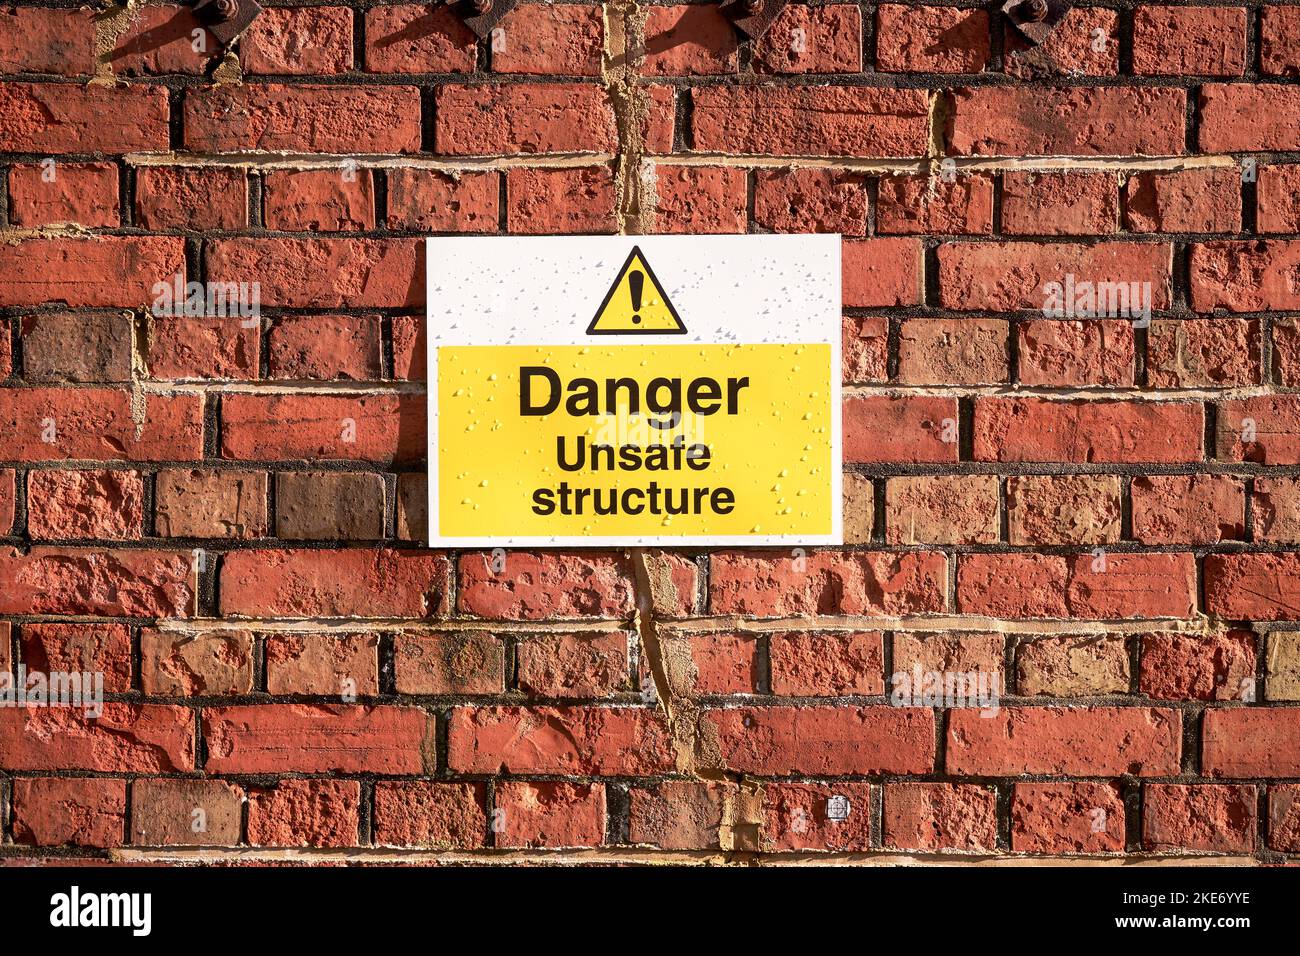 Danger unsafe structure warning sign attached to red brick wall Stock Photo